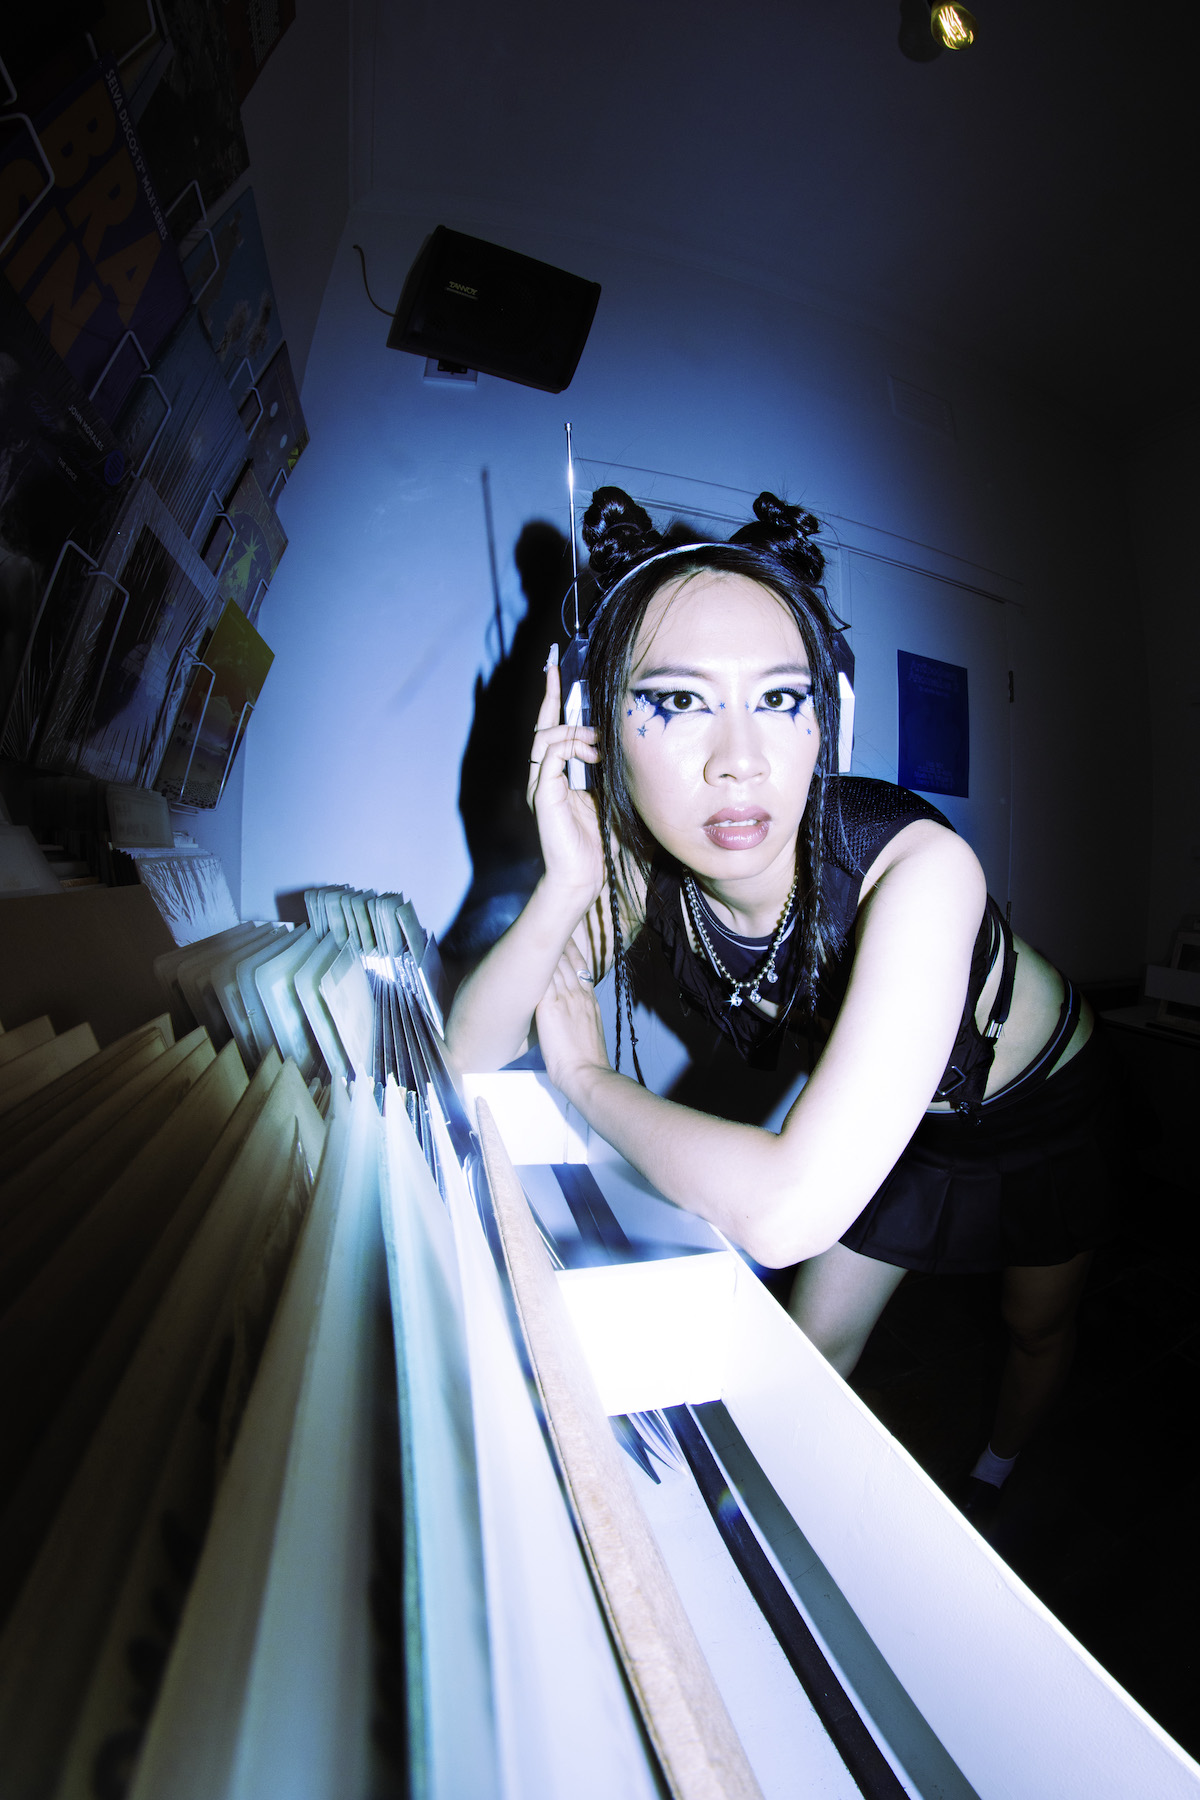 Cloudy Ku – Interview with the DJ and organiser of HER 他 and SPEED 速度. Direction: Marit Holtrust